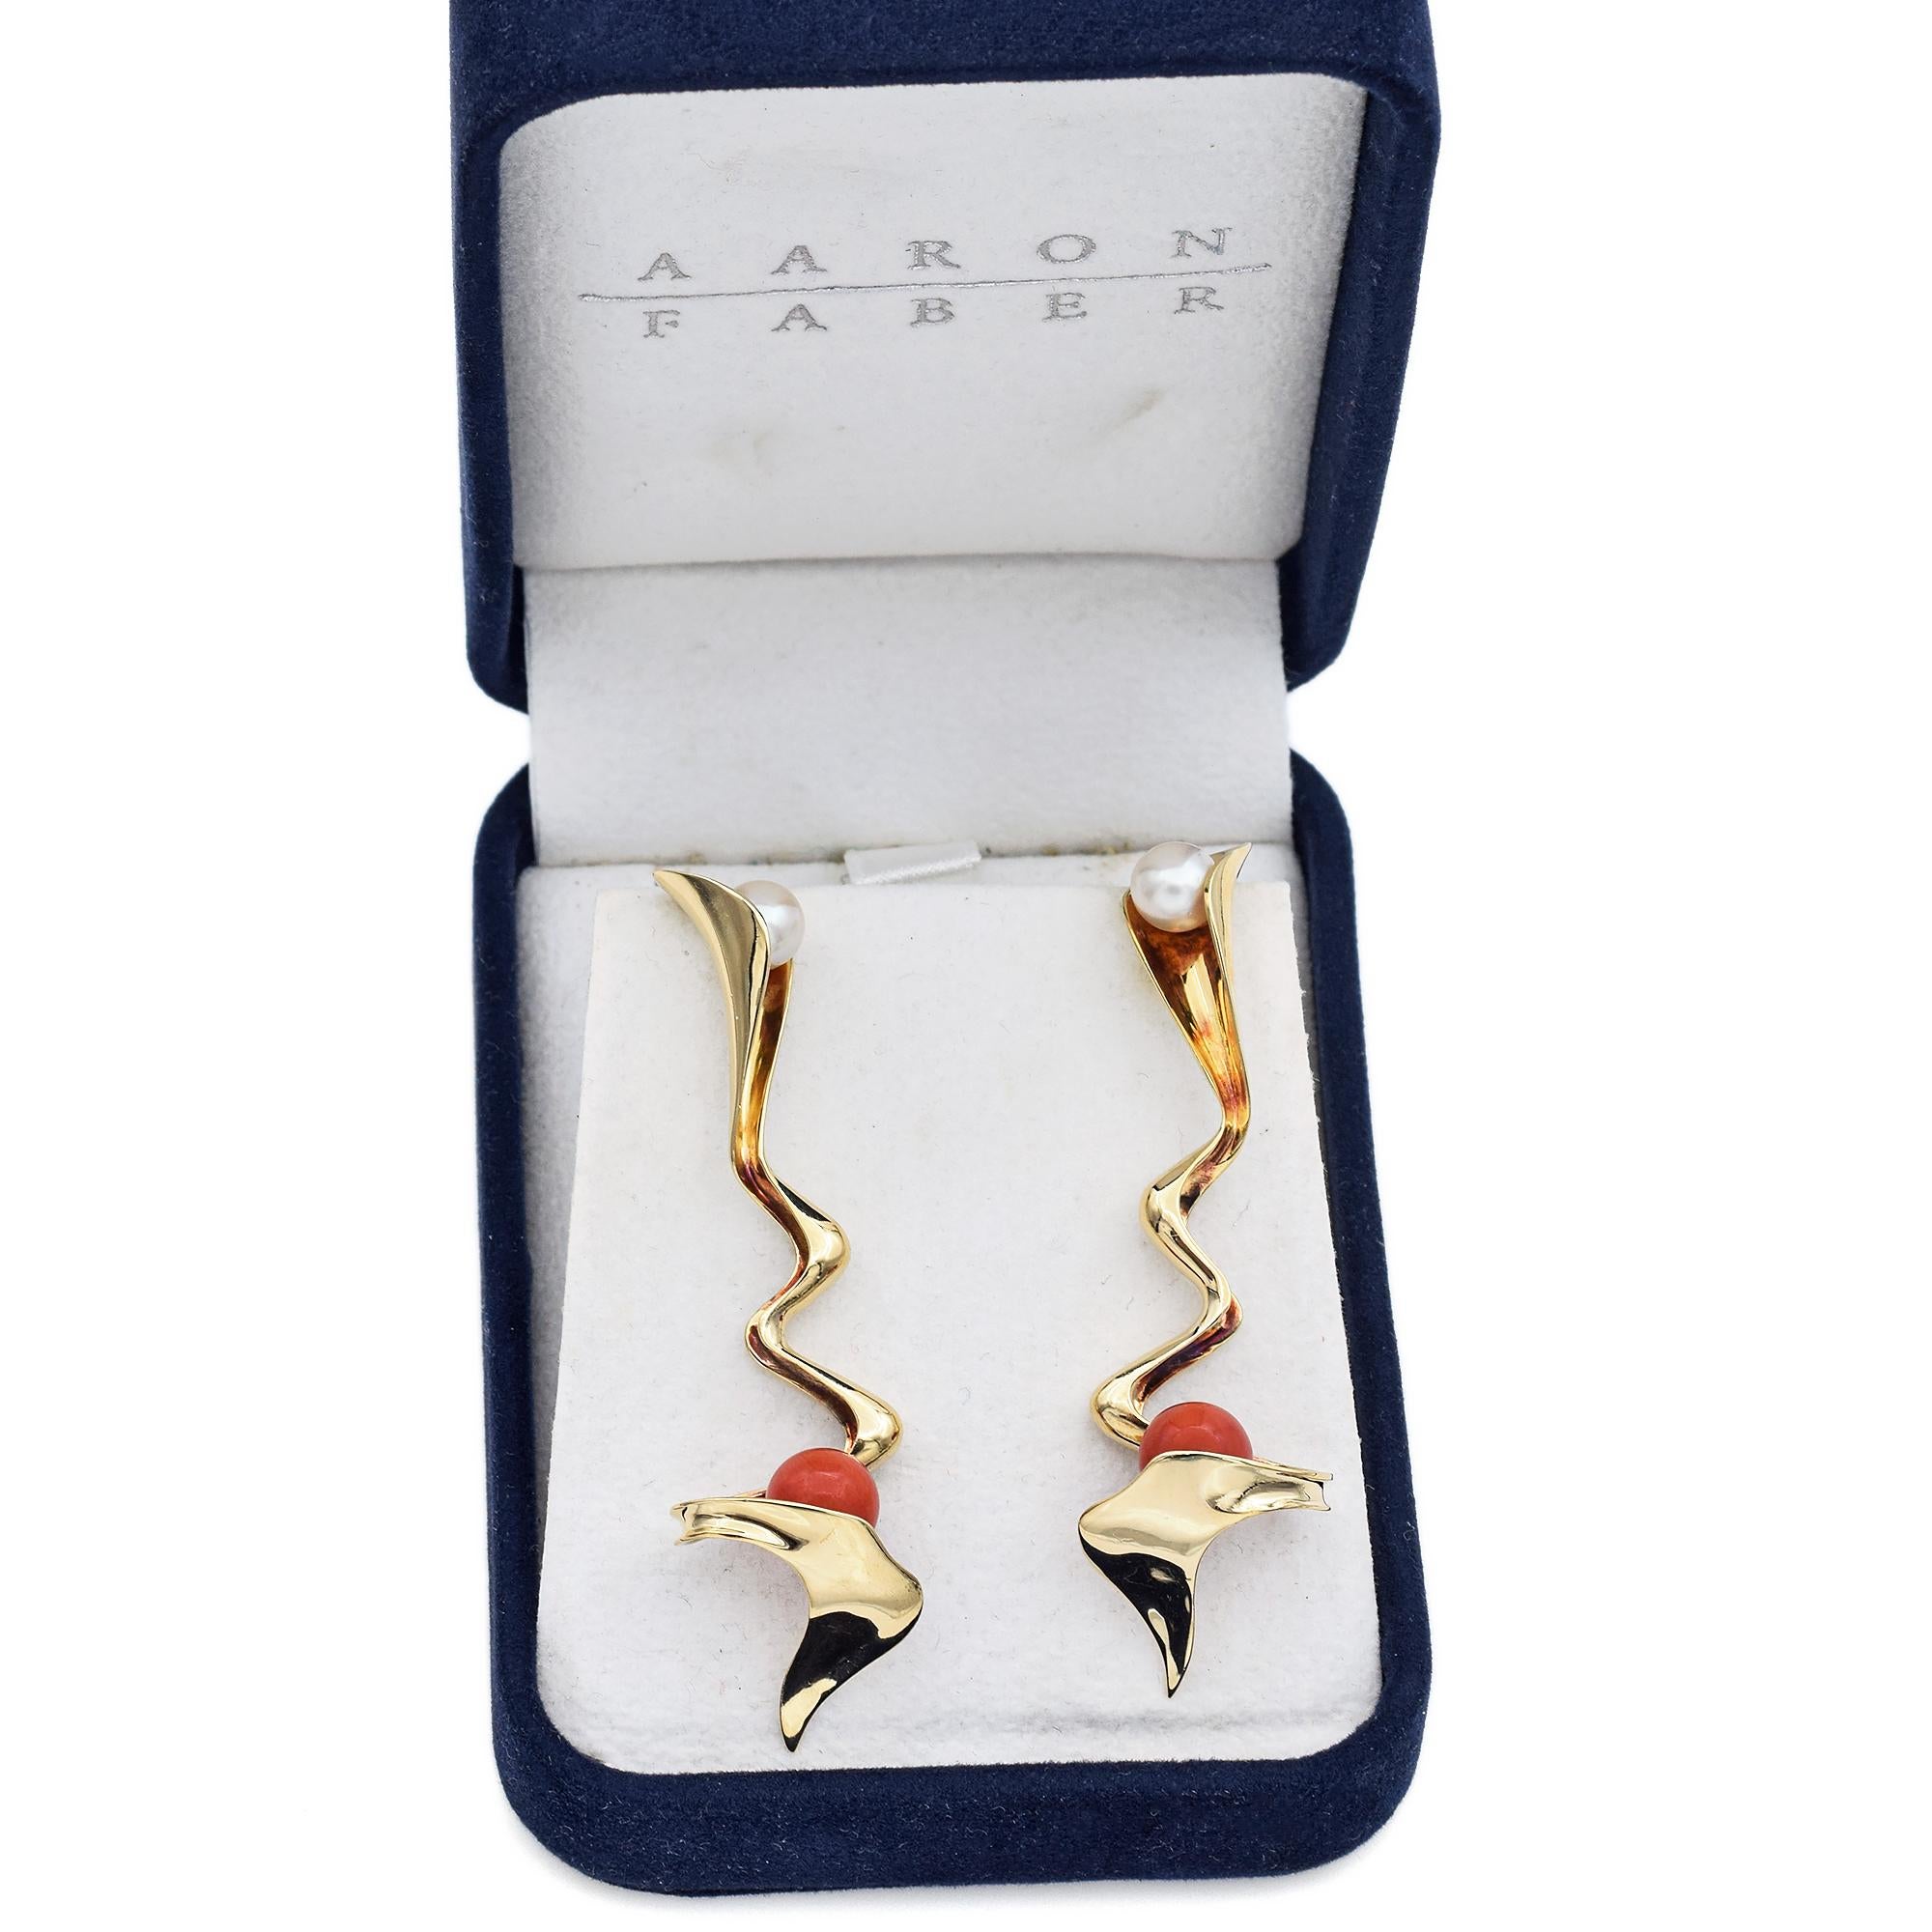 earrings are 18k gold, push backs are steel

Weight: 15.6 Grams
Stone: Red Coral (8.5 mm). Pearl (7 mm)
Measurements: 68.0 x 11.5 mm
Hallmark: 18K Tested

ITEM #: BR-1080-102423-18